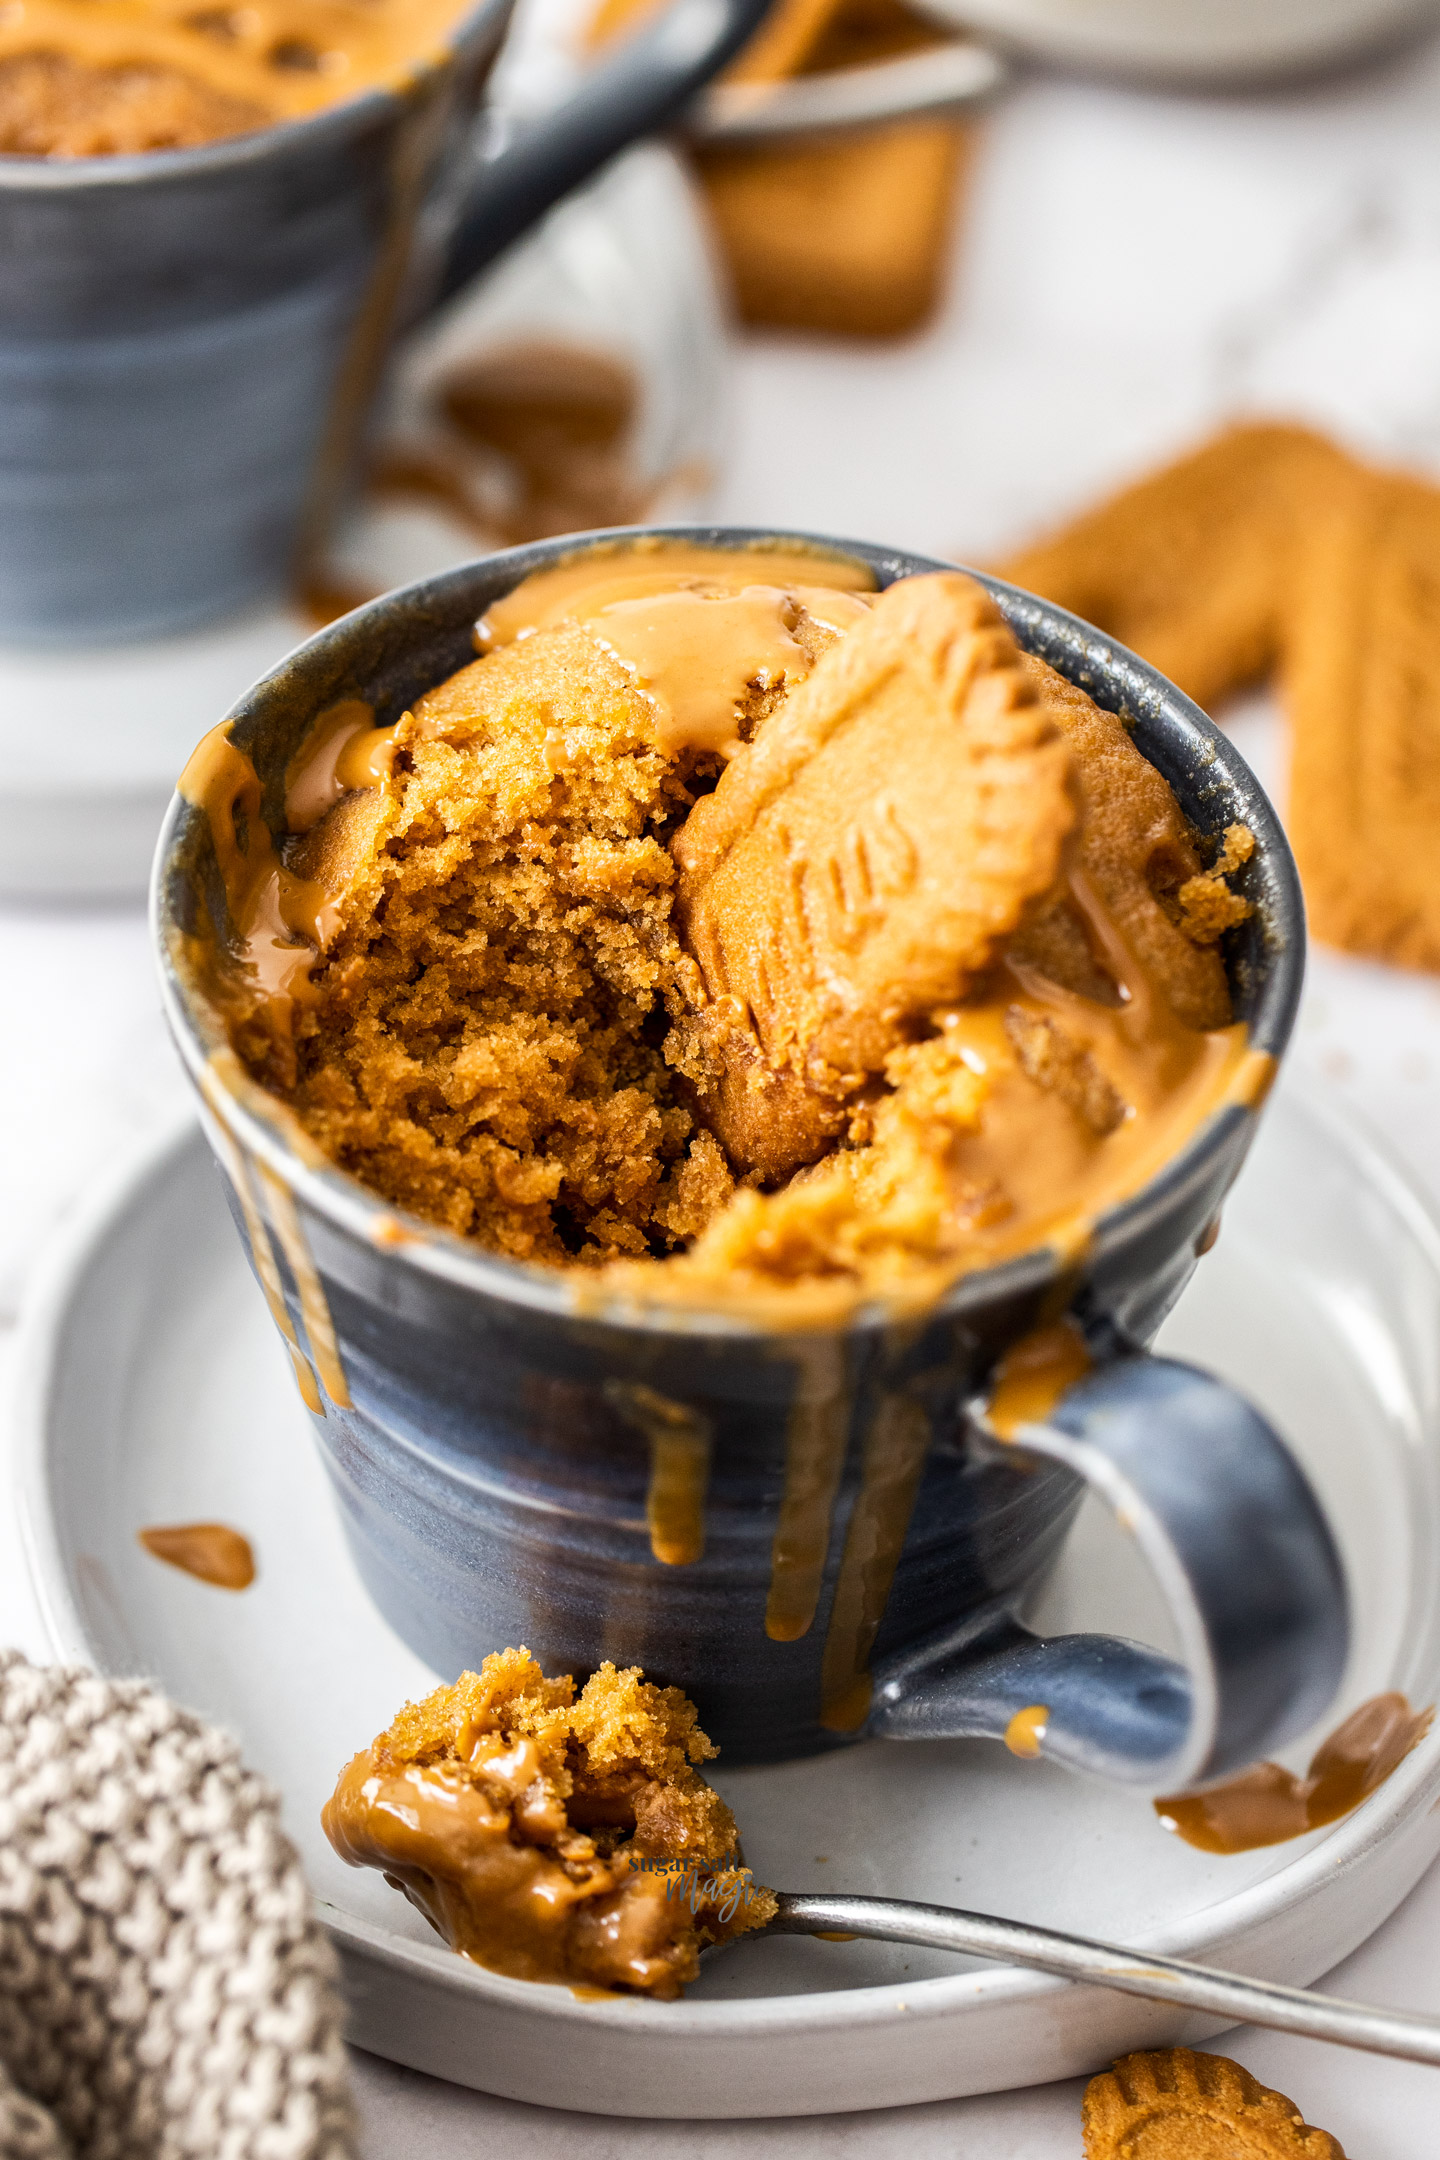 Closeup of a Biscoff mug cake with a Biscoff cookie in the top.